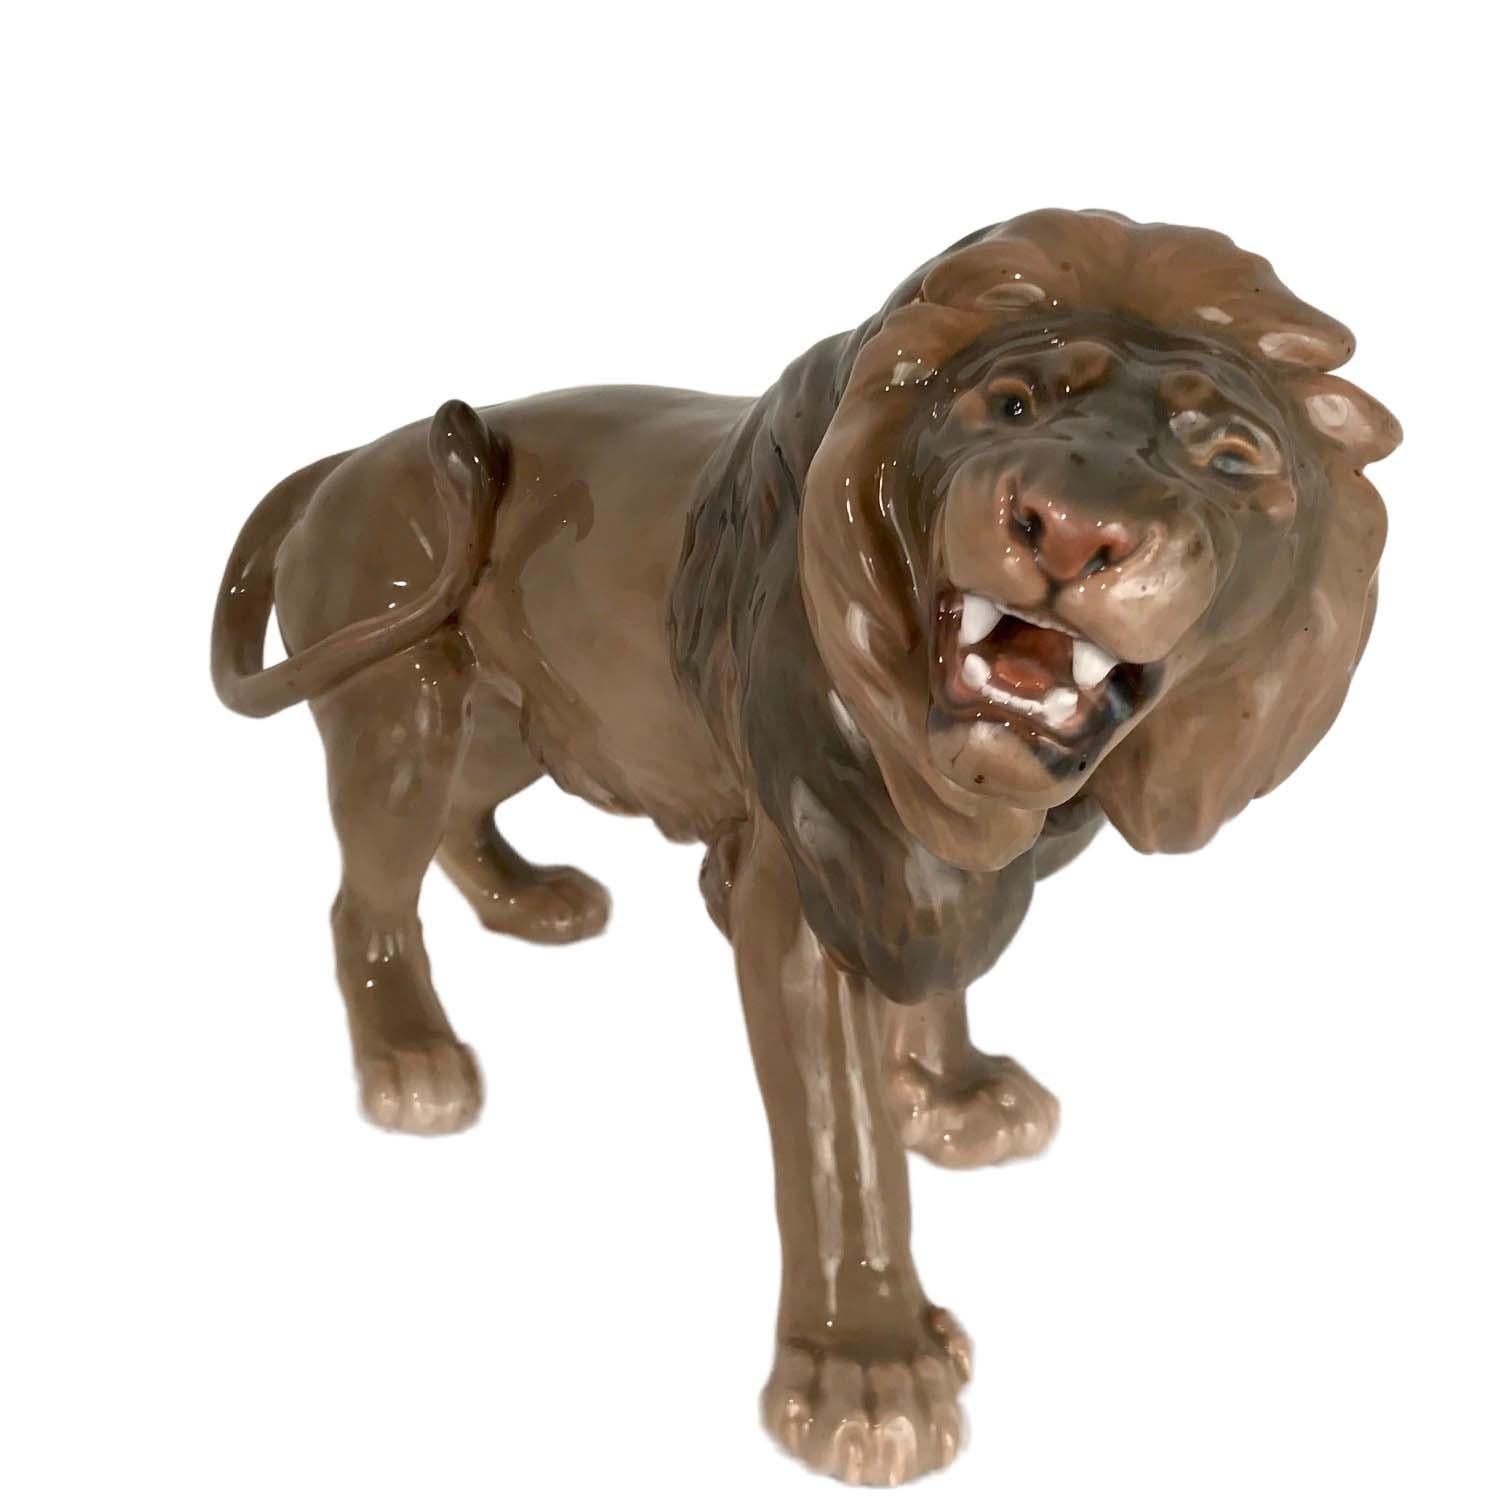 This wonderfully large porcelain roaring lion is well molded and hand painted with attention to detail. It is fully marked with the three towers of Copenhagen on the bottom of one front paw and the product number 2052 on the other.
In perfect